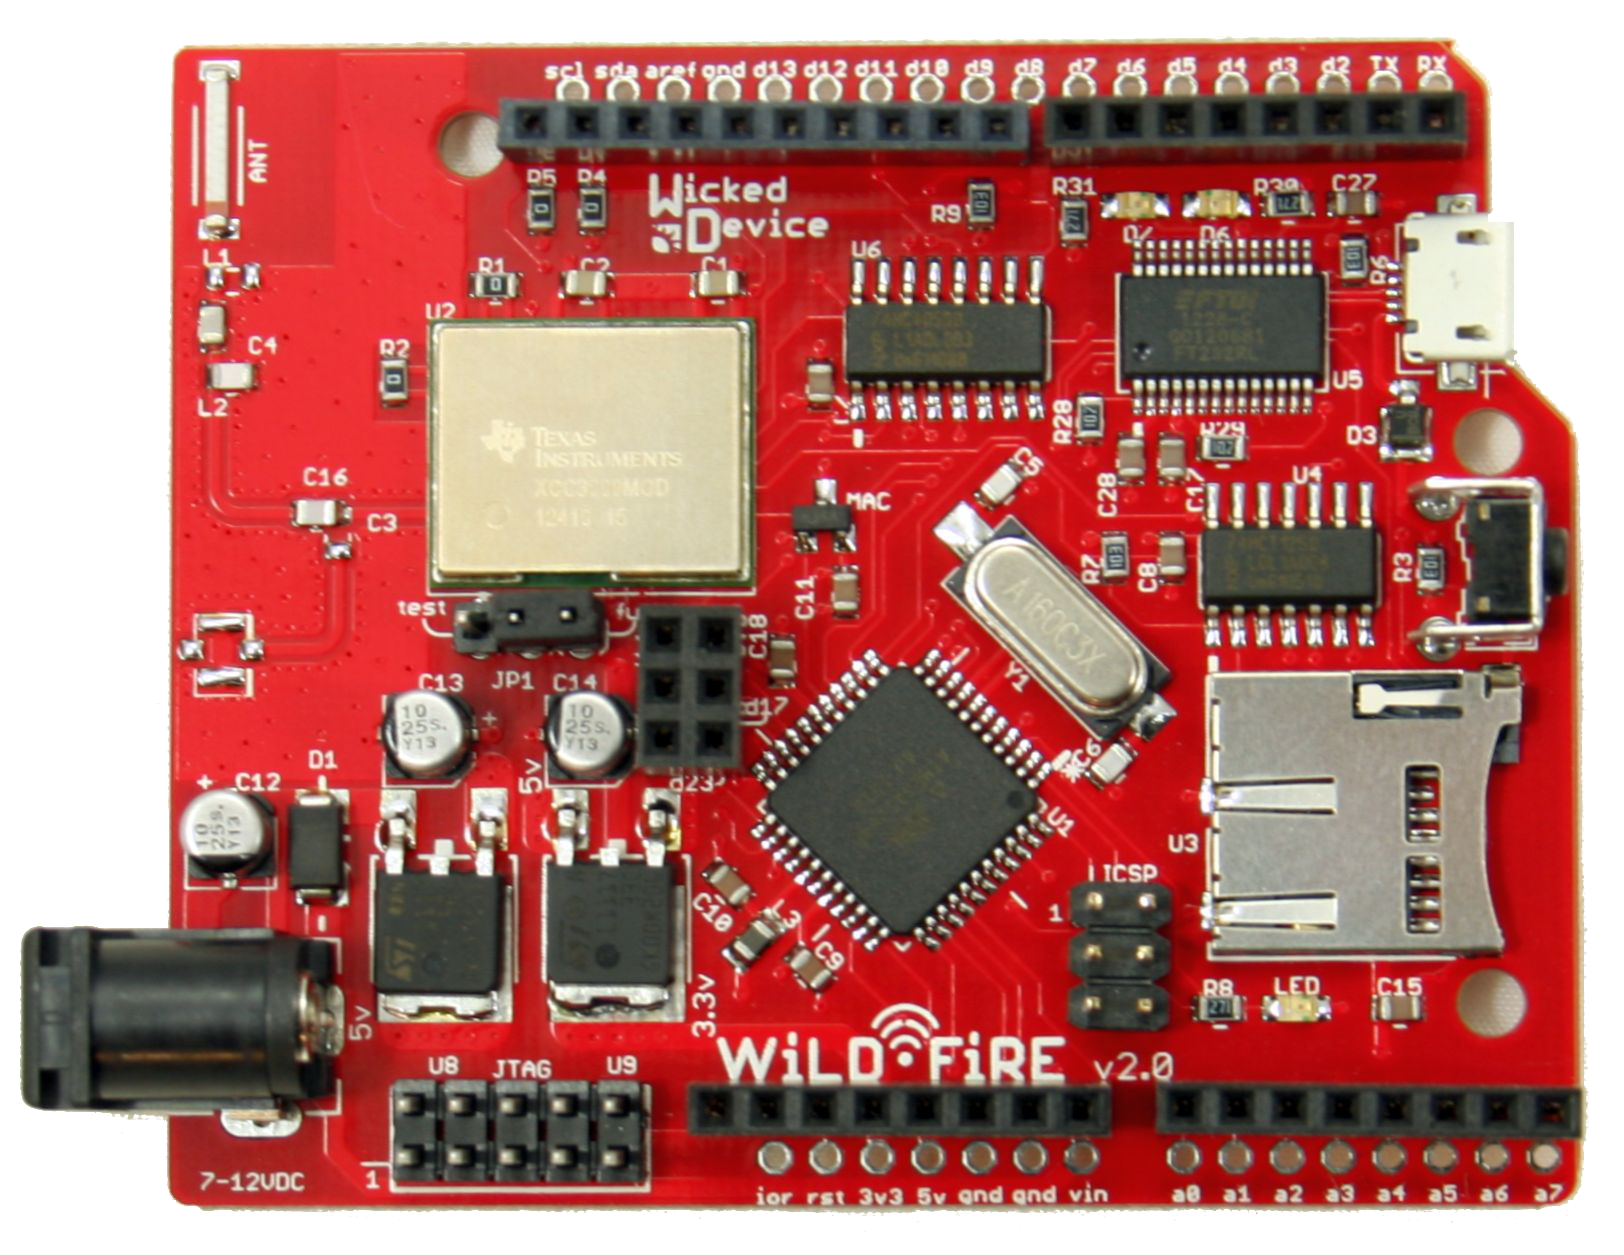 A New WiFi Board Appears: Introducing the WildFire